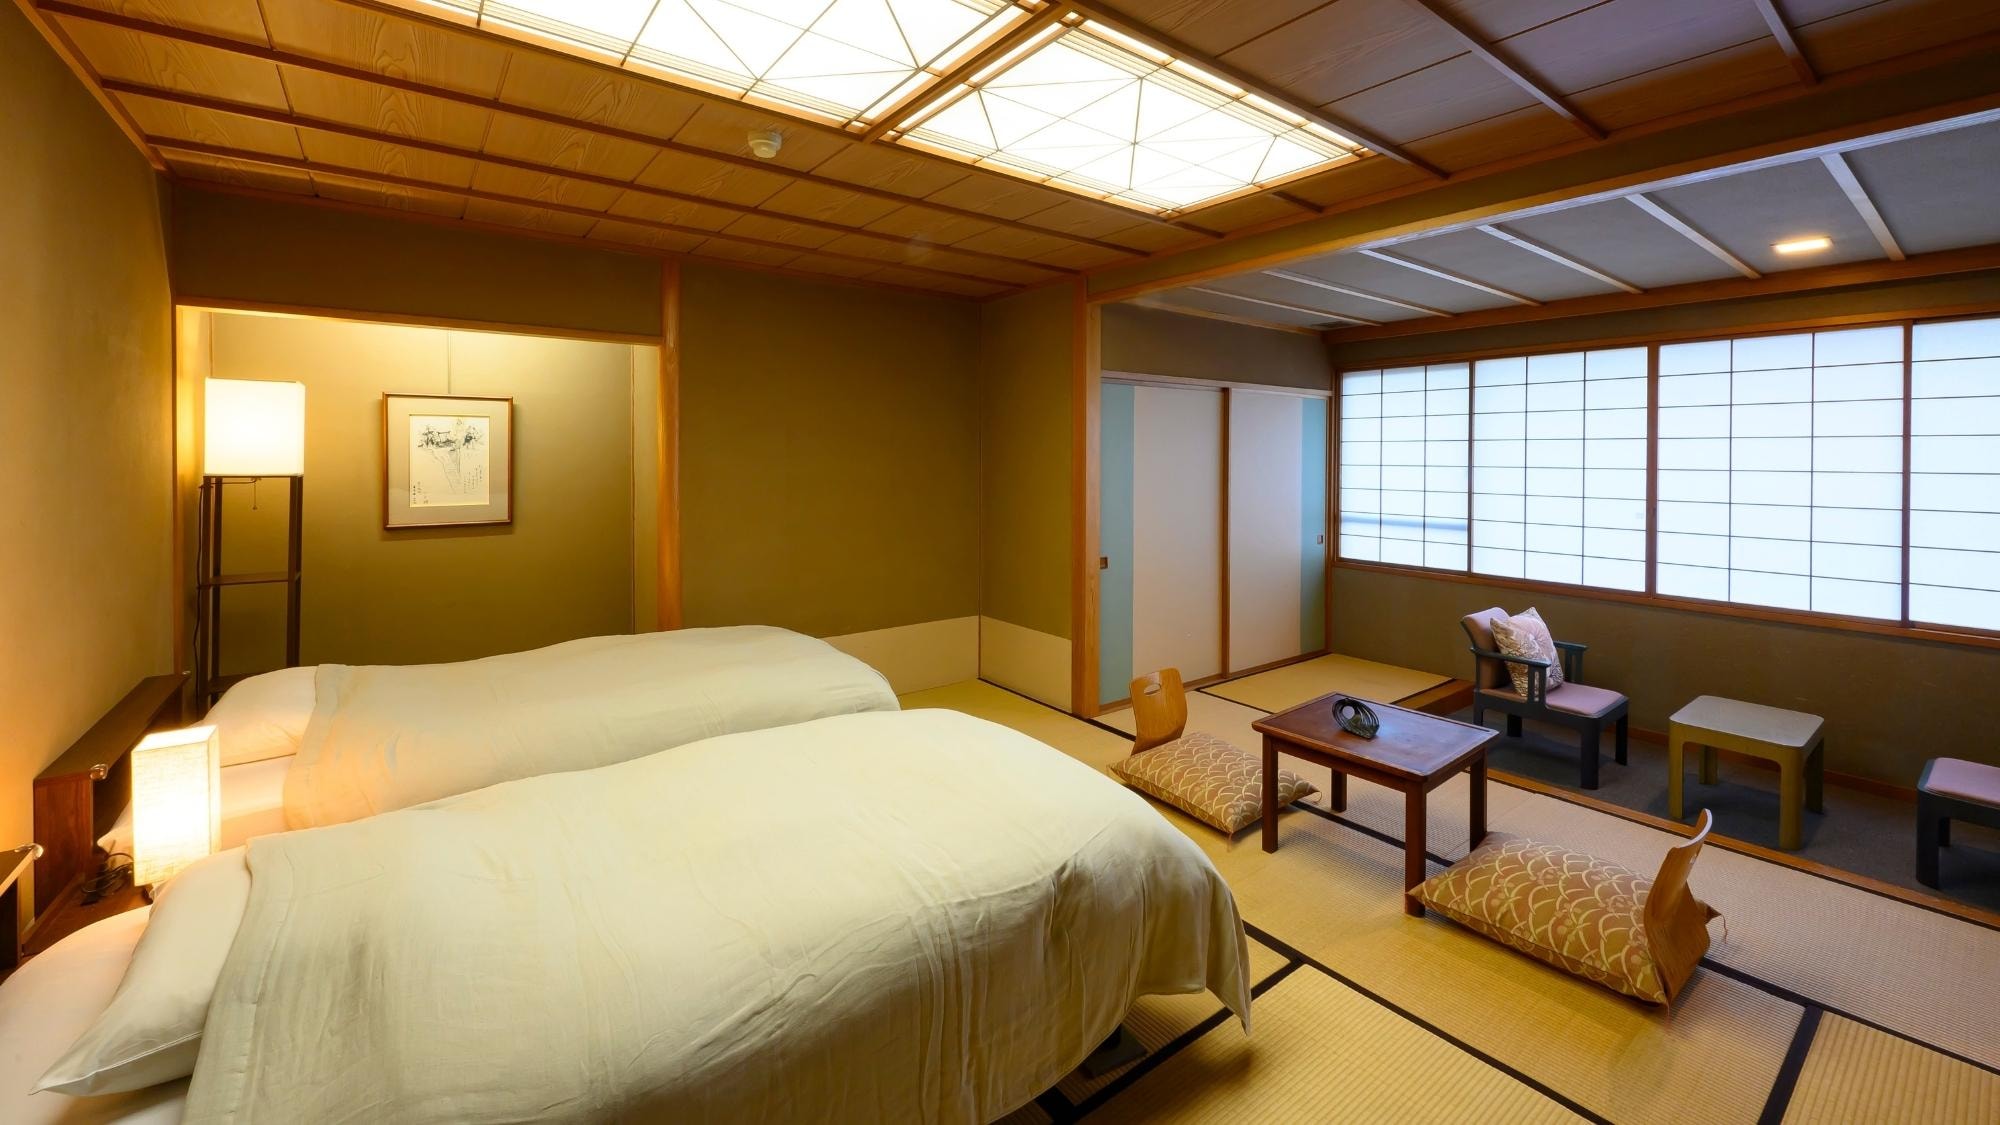 Directly connected to the large public bath! A Japanese-style bed room is now available in the popular Kitanomaru!